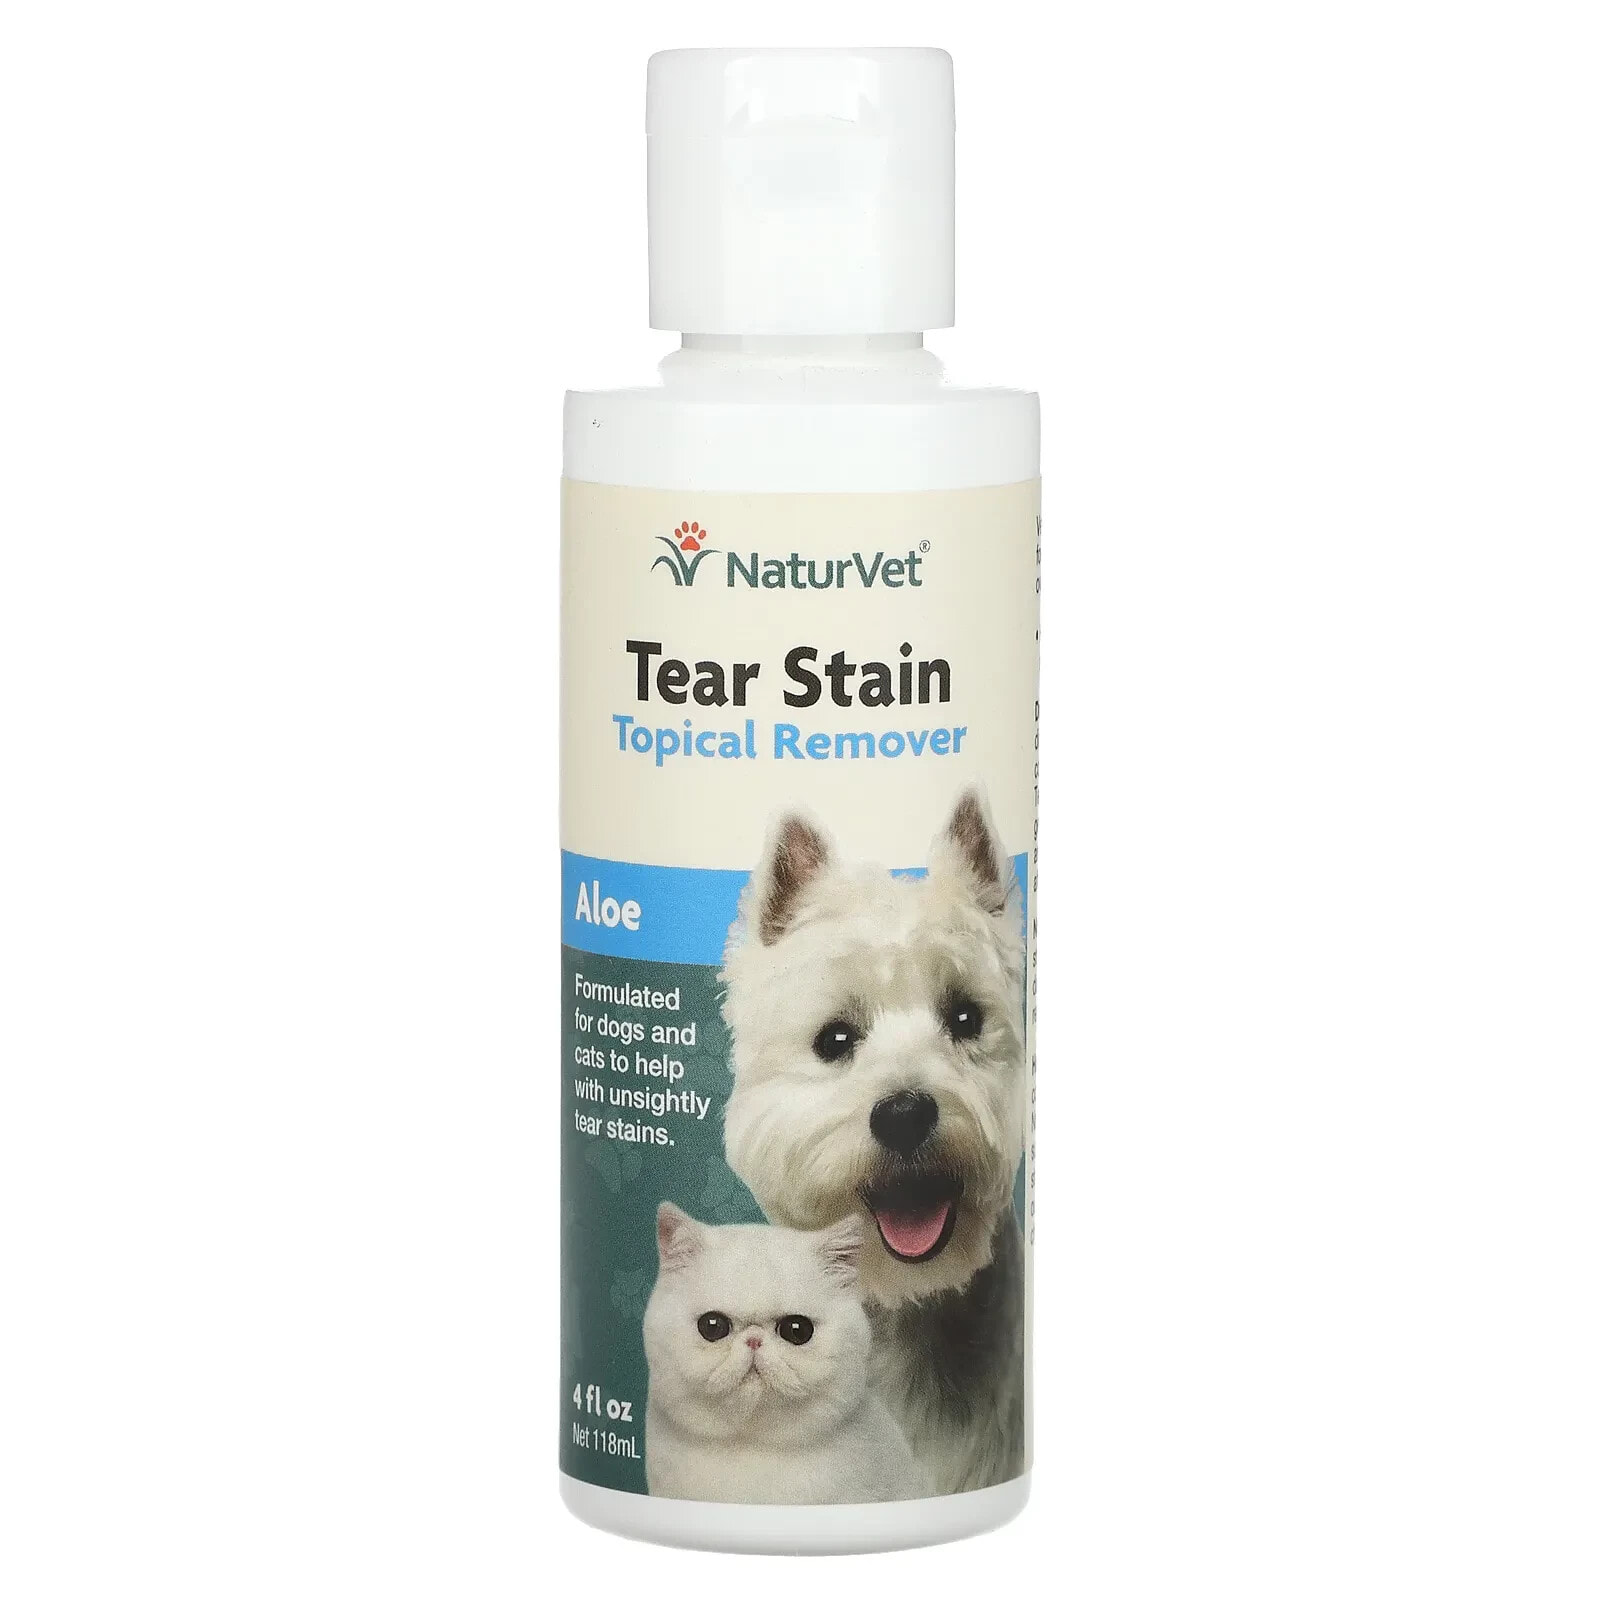 Tear Stain, Topical Remover, Aloe, For Dogs & Cats, 4 fl oz (118 ml)